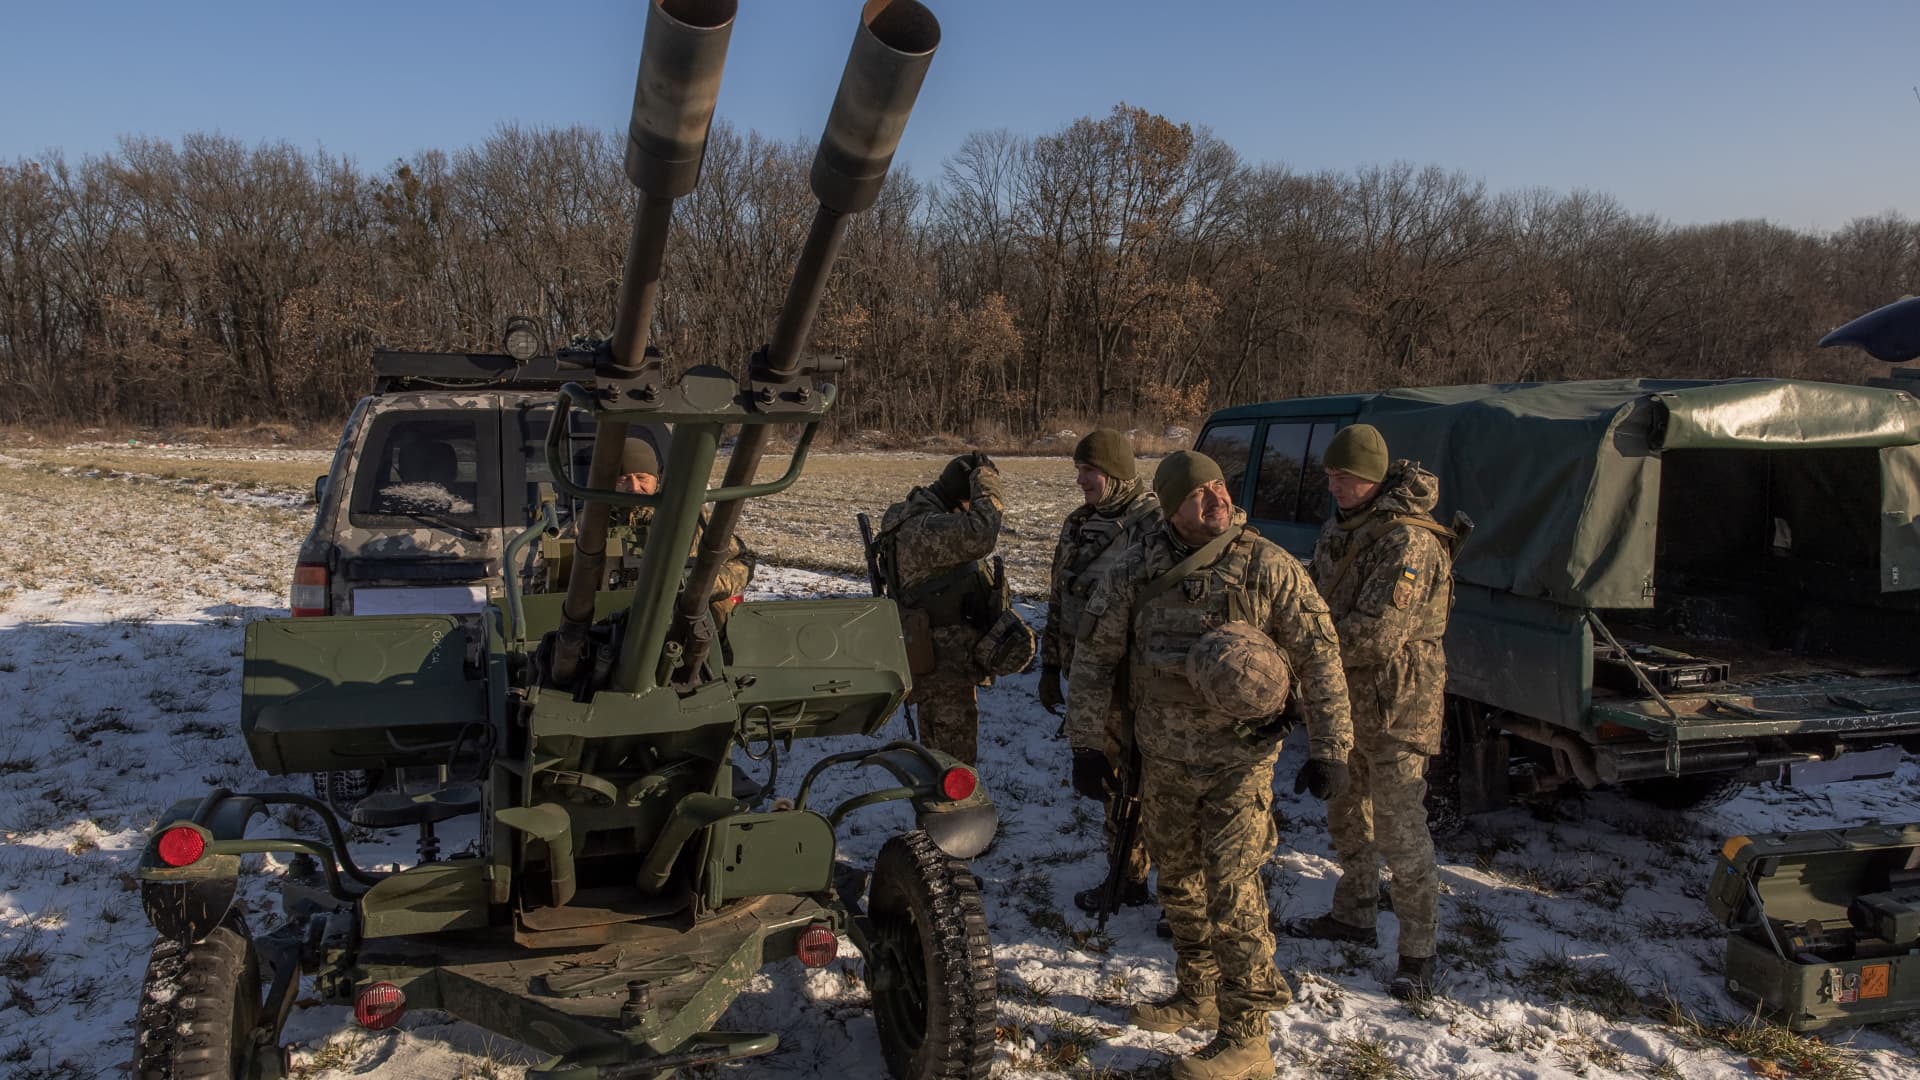 Ukrainian servicemen of a drone hunting team stand next to an anti-aircraft twin-barreled autocannon that they use to target Russian launched drones, in the outskirts of Kyiv, on November 30, 2023, amid the Russian invasion of Ukraine.